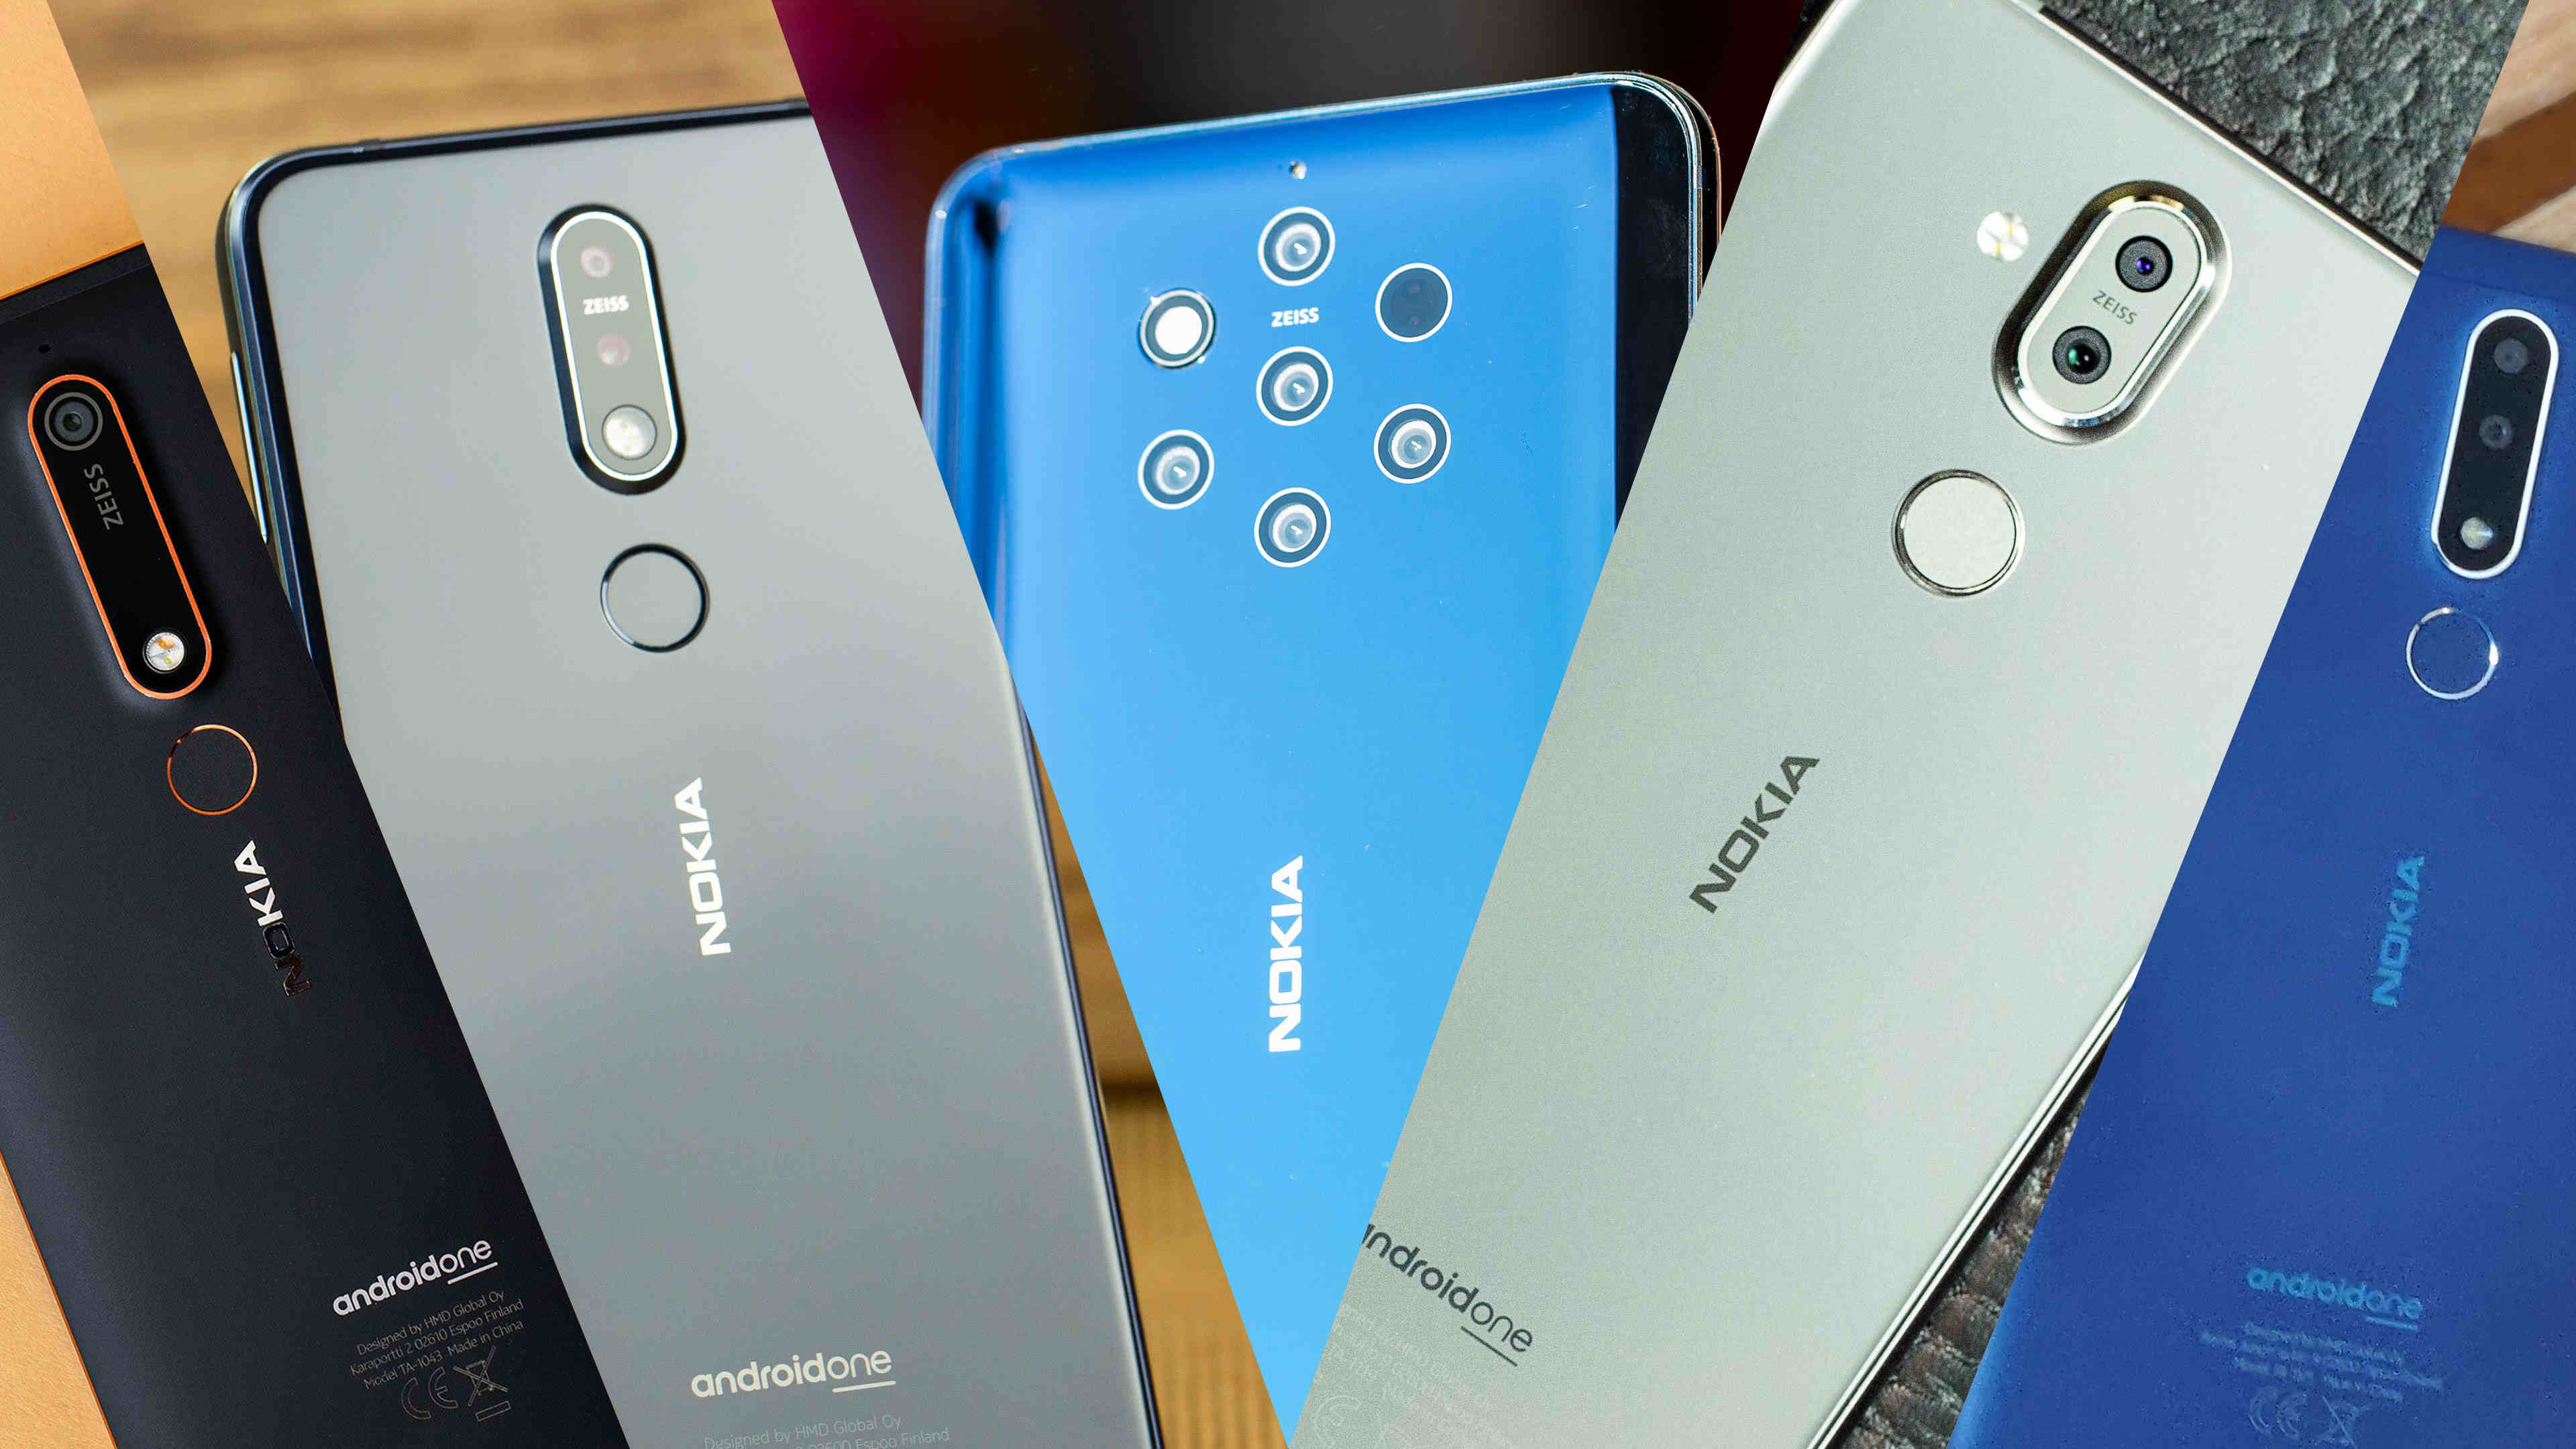 nokias-newest-android-phone-has-an-unbelievably-cool-feature